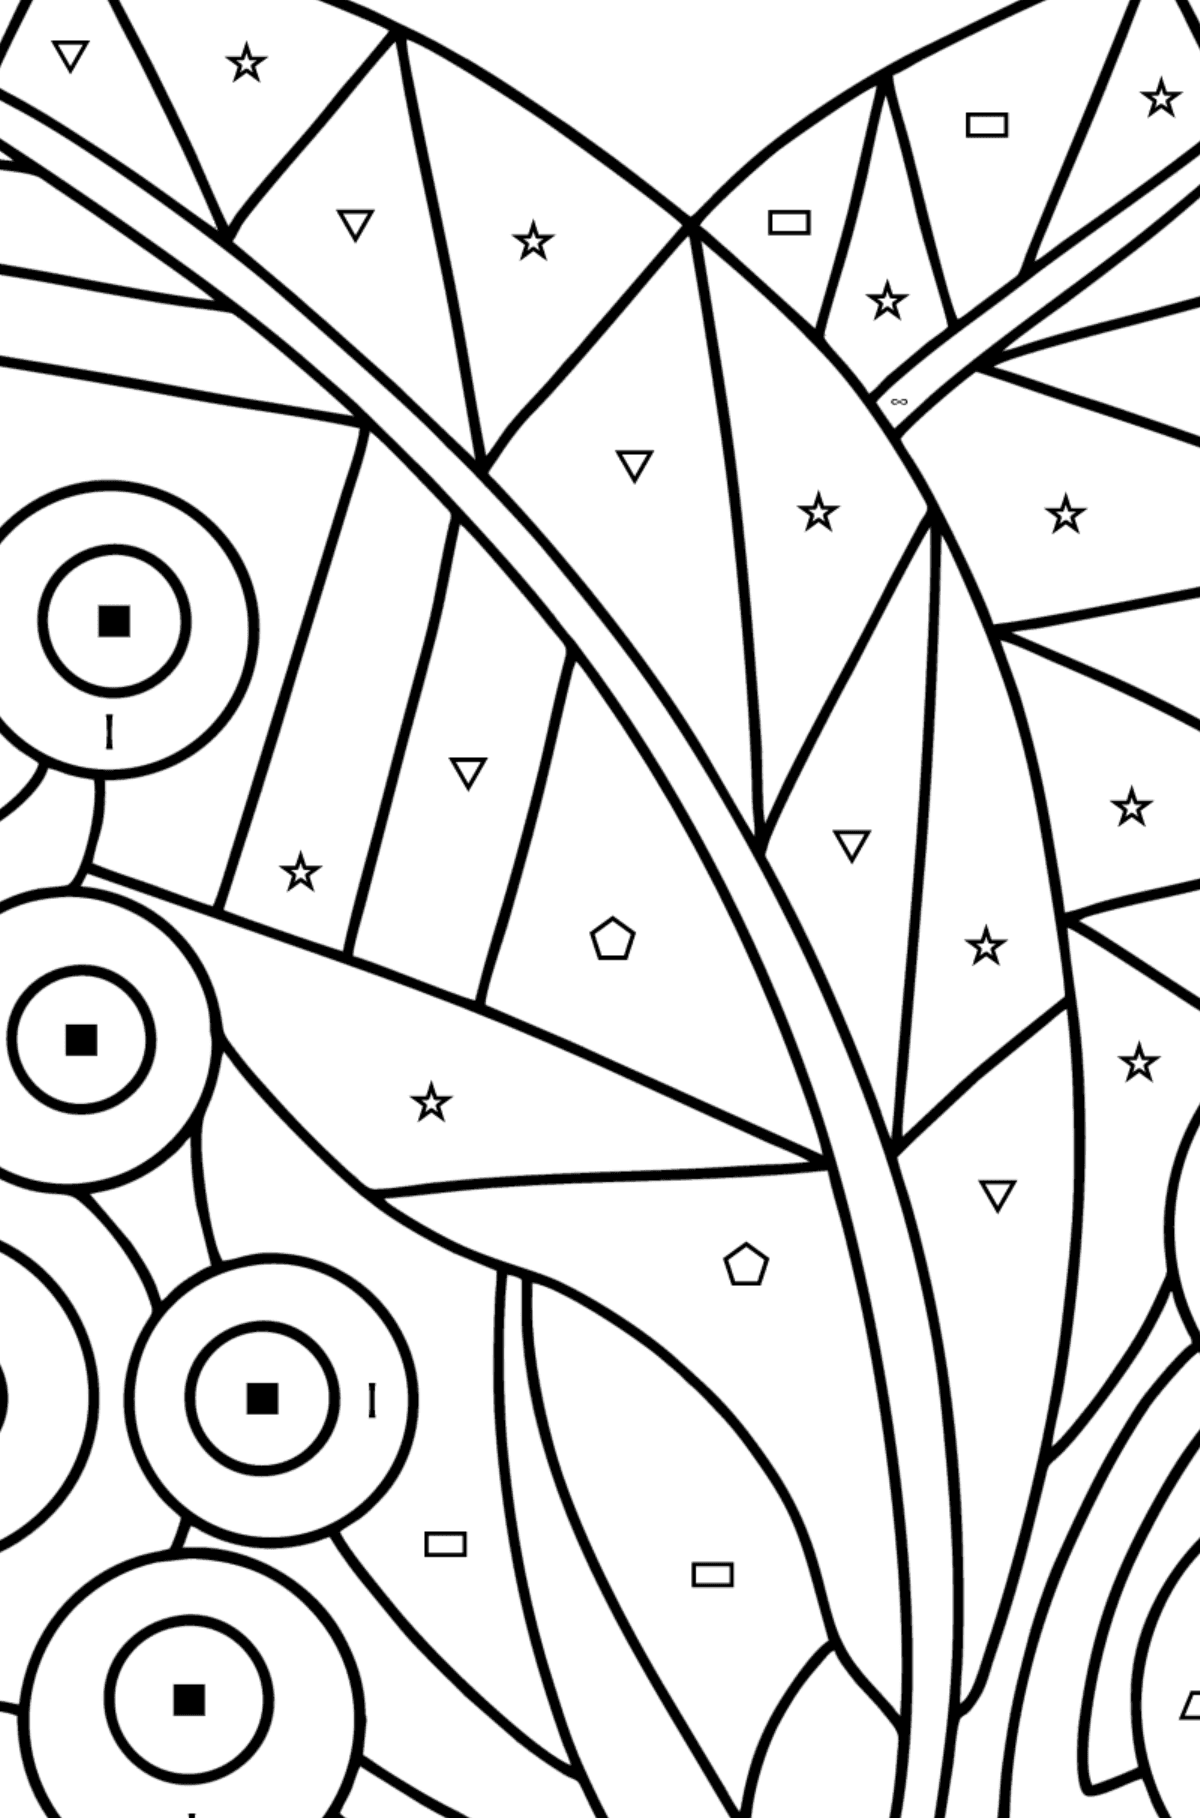 Anti stress Grapes coloring page - Coloring by Symbols and Geometric Shapes for Kids